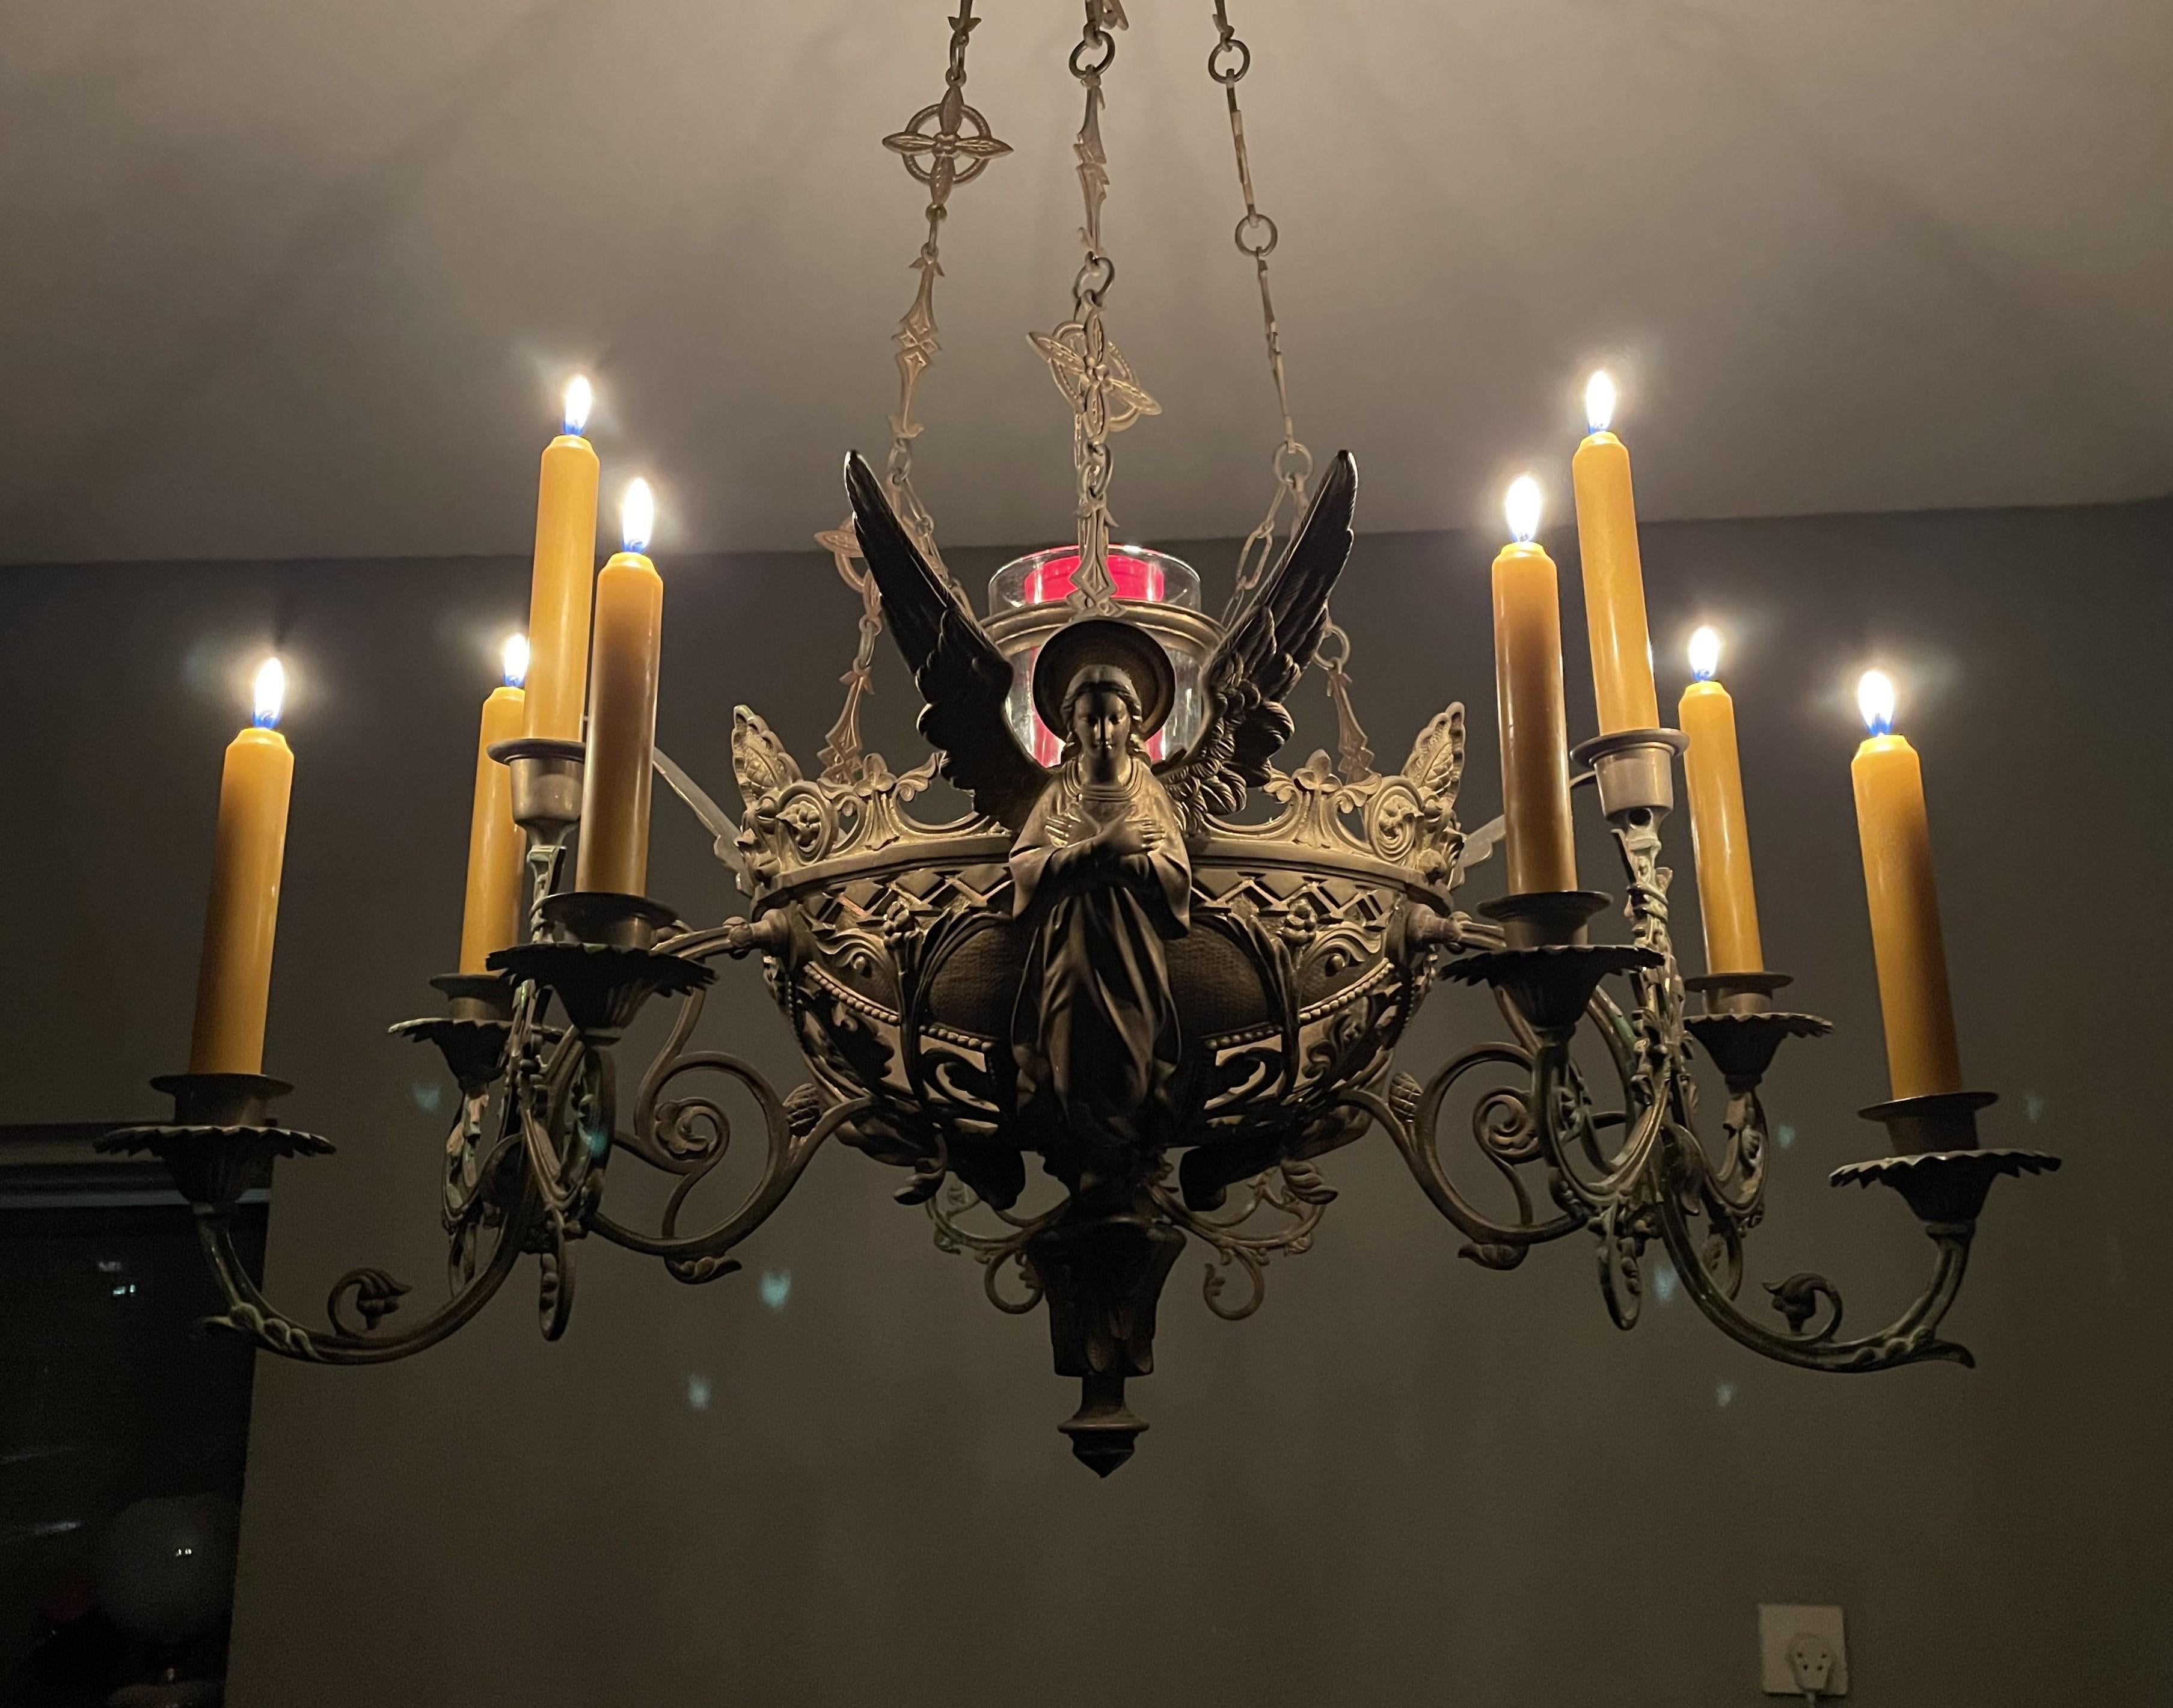 Bronze Gothic Revival Candle Chandelier w. Virgin Mary & Marian Cross Sculptures For Sale 10